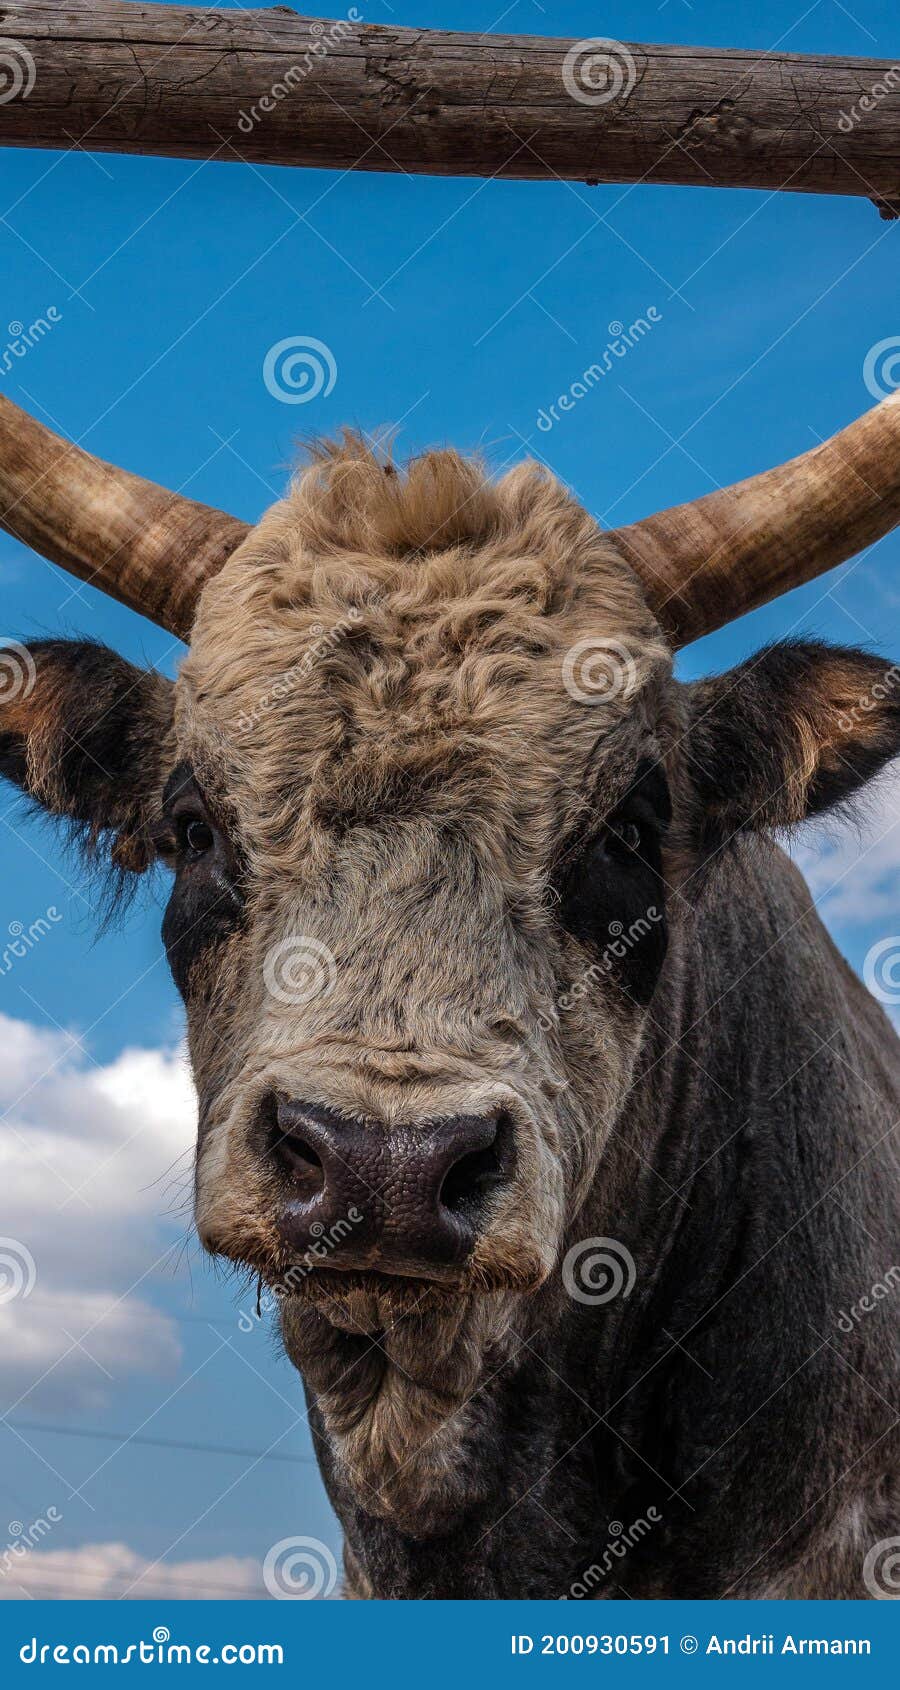 Horned Cow, Cow`s Head Close-up. Bull Animal on the Farm Stock Image -  Image of china, design: 200930591